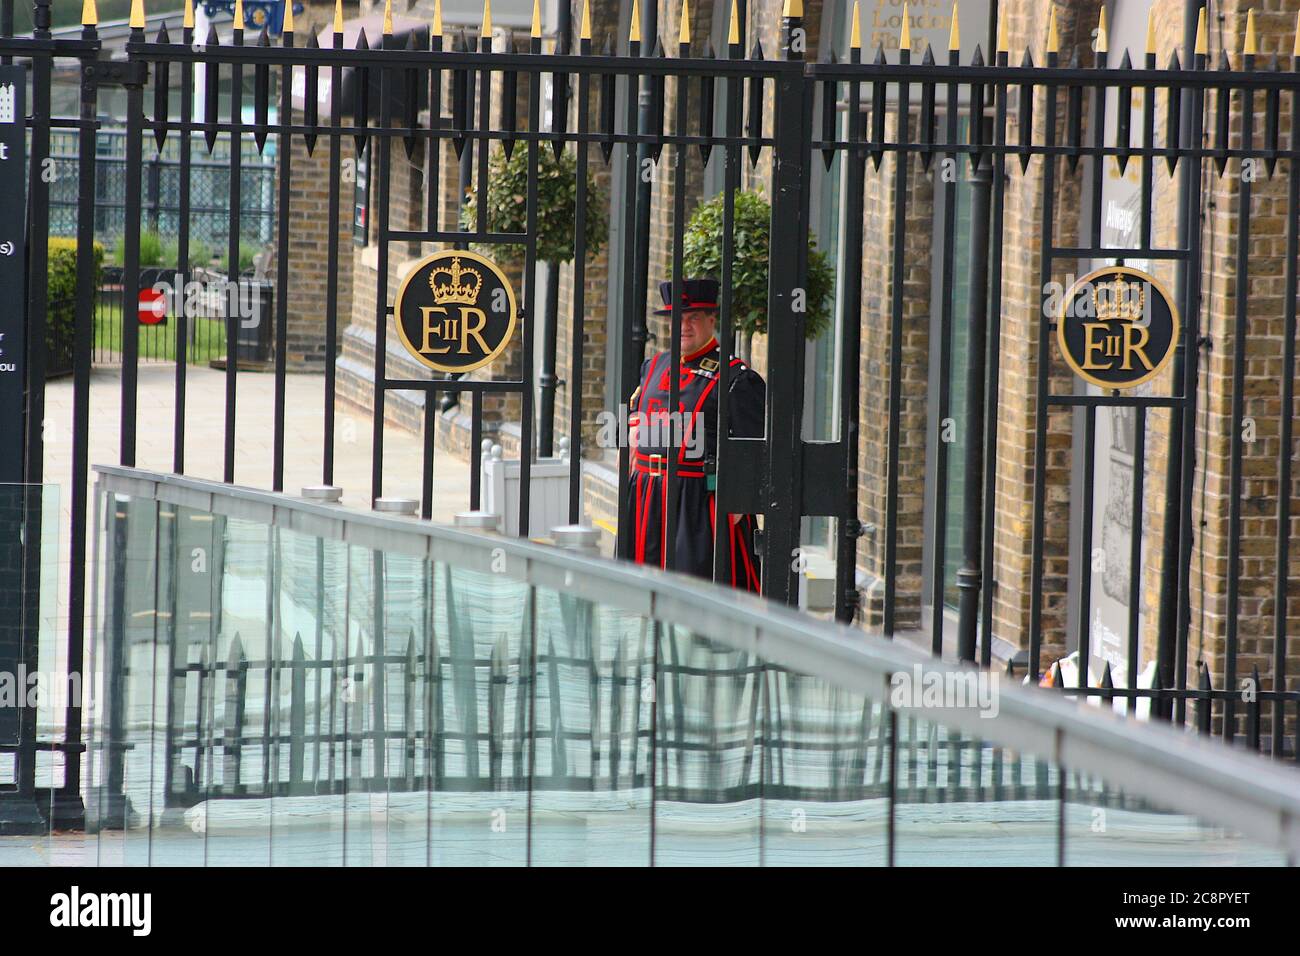 Yeoman Warders (Beefeaters) guarding the Tower of London, England, United Kingdom Stock Photo